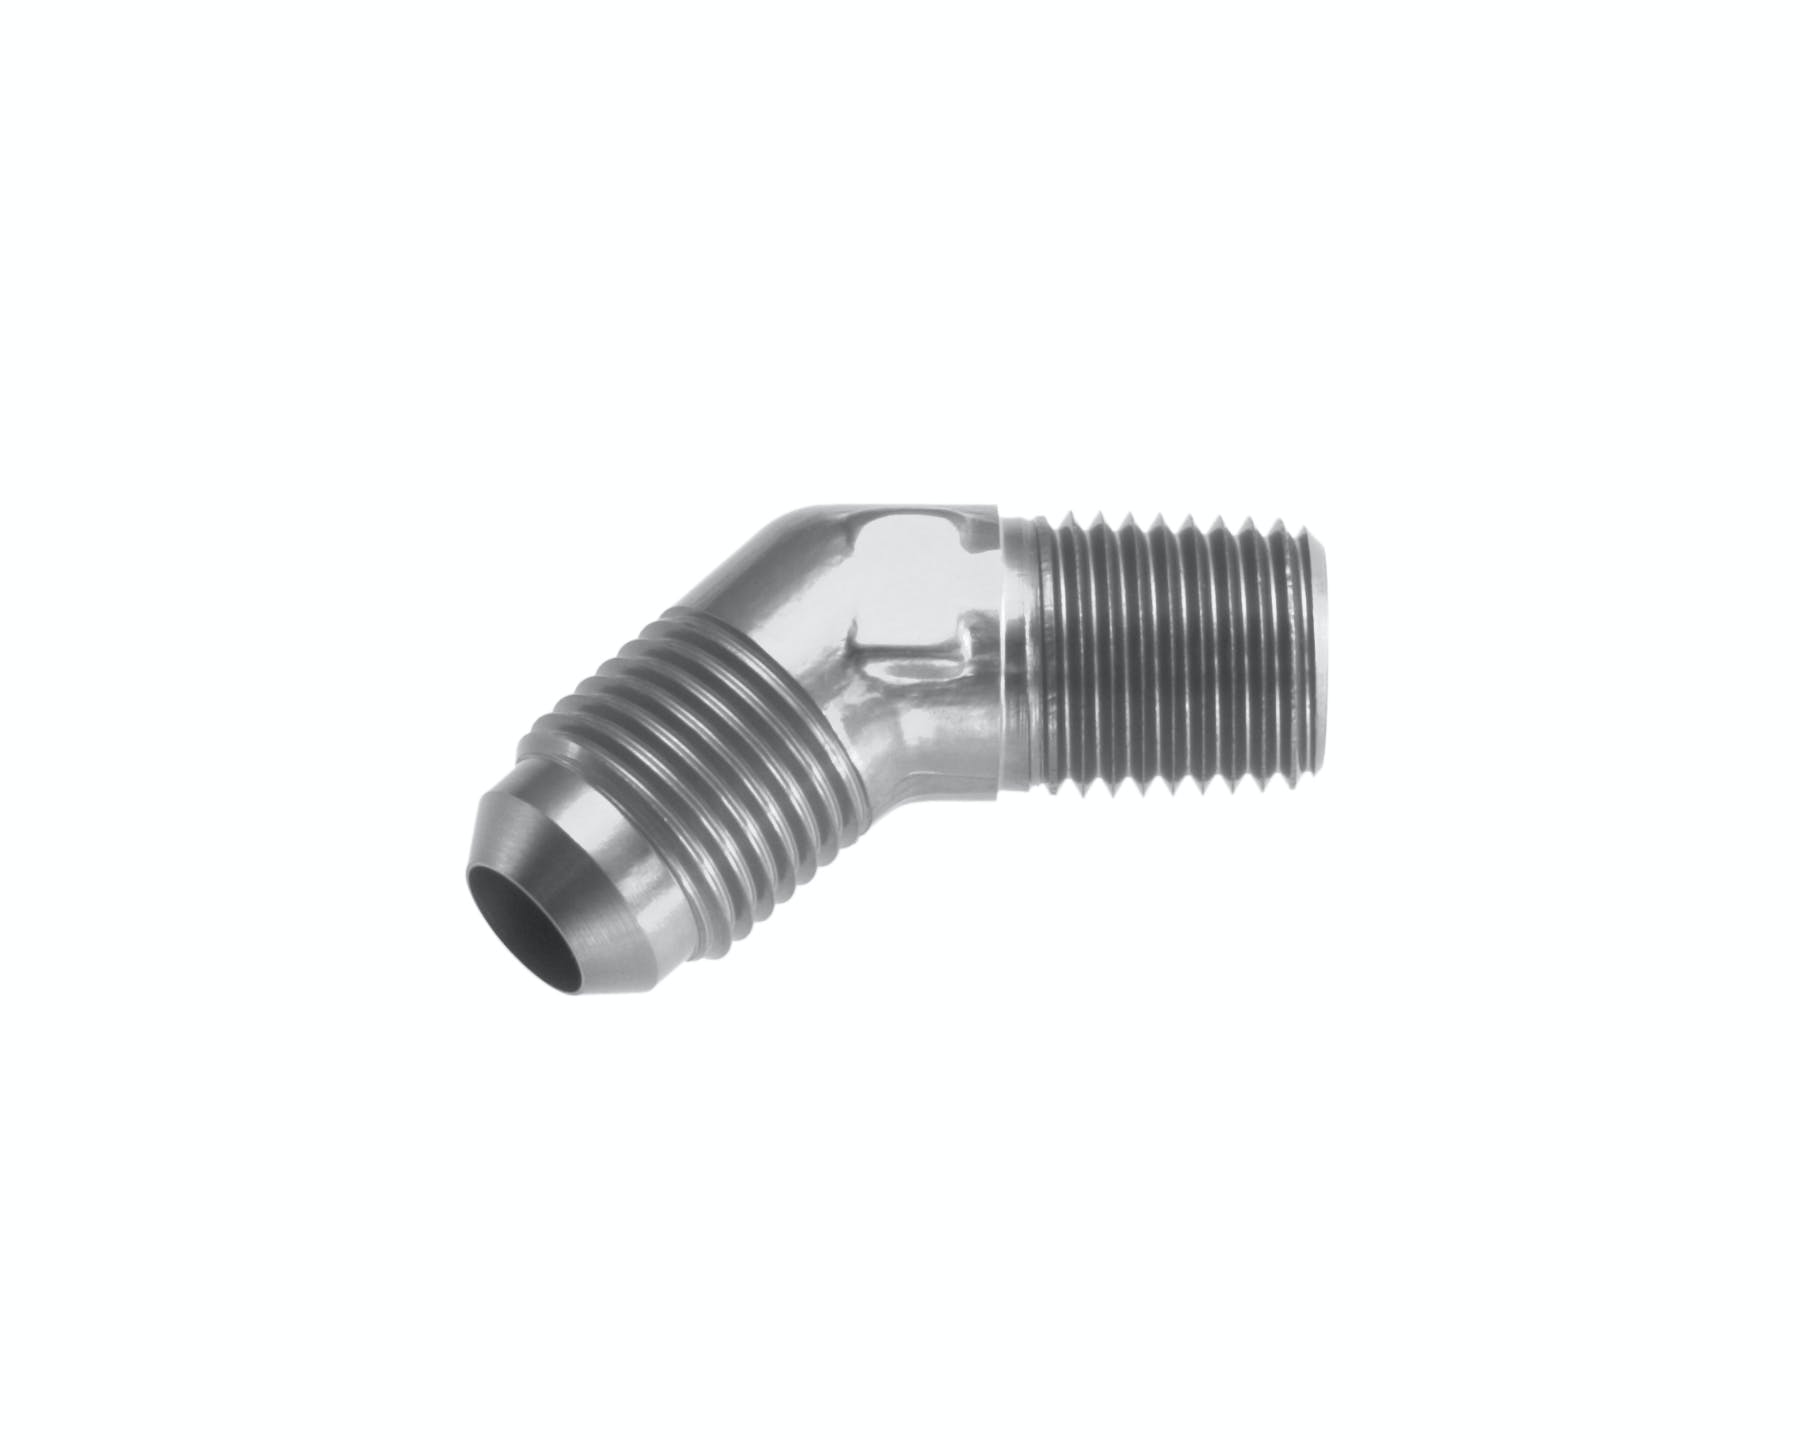 Redhorse Performance 823-06-06-5 -06 45 degree Male adapter to -06 (3/8in) NPT Male  - clear